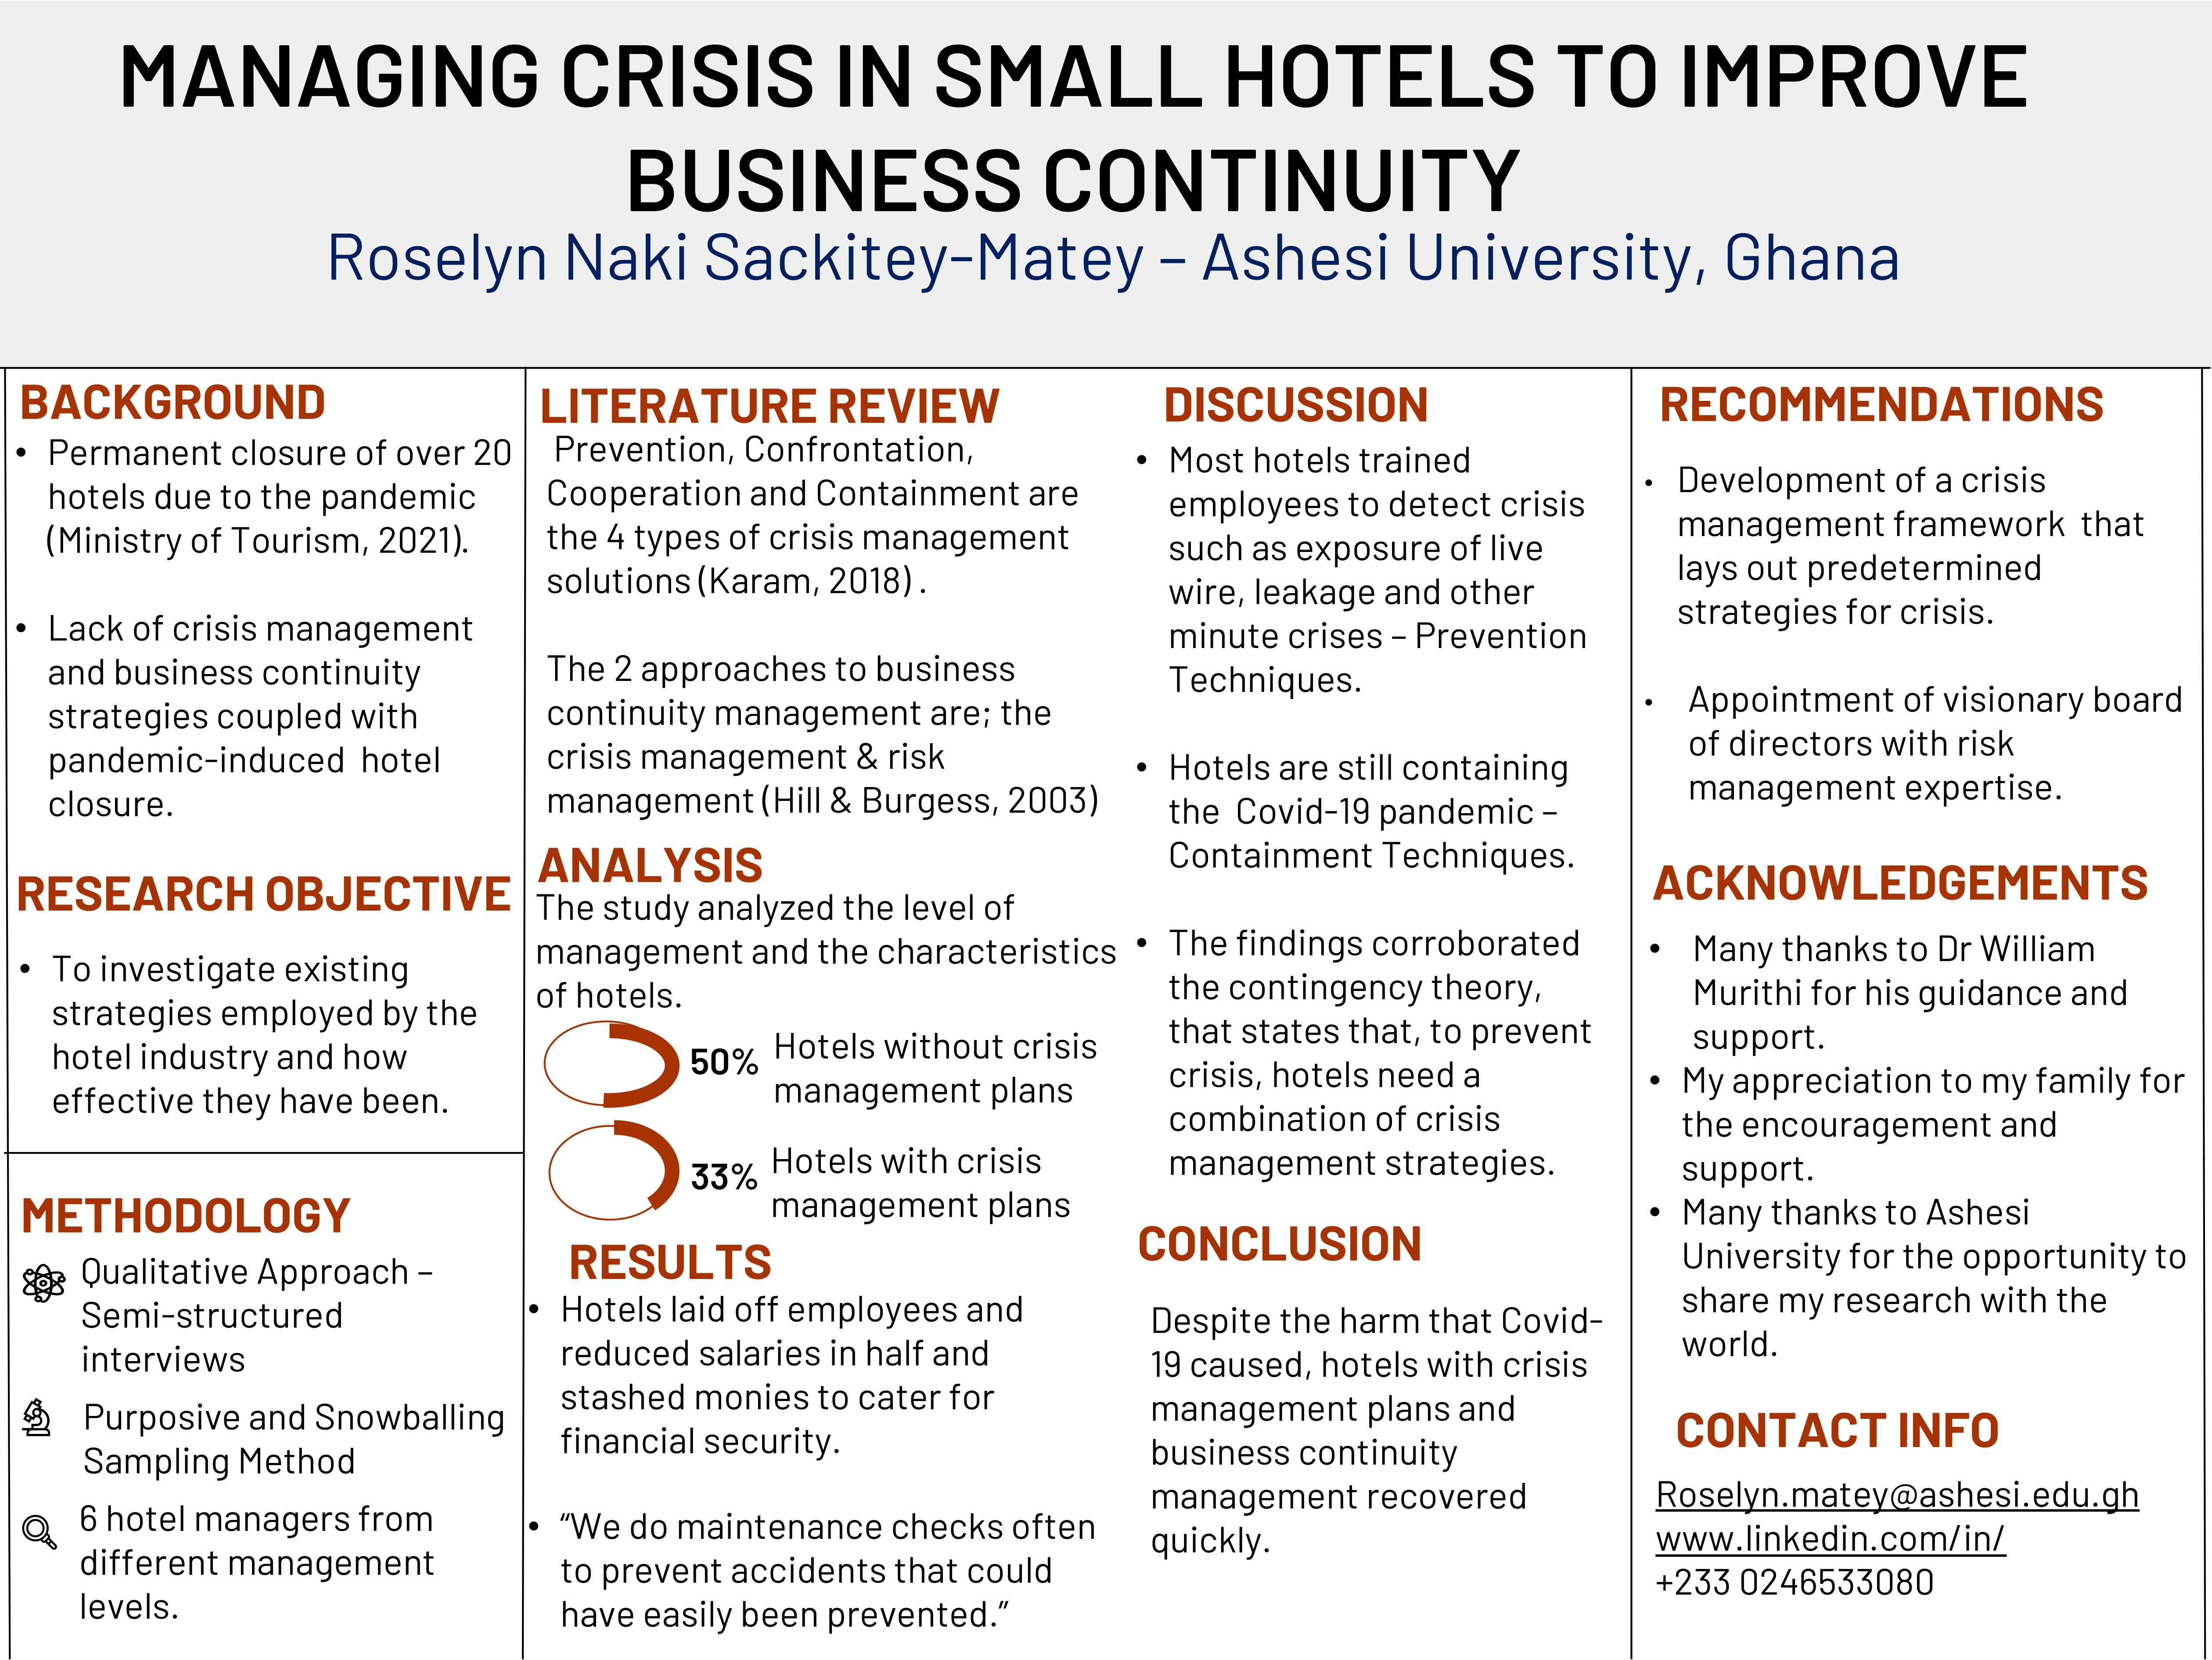 While studies prove that small hotels are important contributors to the economy, the recent Covid-19 pandemic showed a downfall, as many hotels collapsed. This has been linked to many hotels not owning crisis management plans to help minimize the harsh effects of a crisis. This study therefore examined how hotels manage crisis to improve business continuity and to what extent crisis management strategies are used in small hotels in Accra, Ghana.  Extensive research was done on the hospitality industry, Crisis and Crisis Management, Business Continuity and the Business and Crisis Lifecycle. This research made use of the phenomenological approach to qualitative research with semi-structured interviews as a data collection tool. This study collected data from six hotel managers in Tema on their perspectives and lived experiences during the Covid-19 pandemic. The findings showed that the majority of hotels, being small ones, had no crisis management plans and little crisis management expertise to use in their establishments. Due to a lack of knowledge, the hotels that had crisis management plans hardly ever used them.  Small hotels in Ghana are at risk of collapsing when encountered with a crisis due to little to no knowledge of crisis management strategies or plans, this affects the profitability and stability of the Ghanaian economy.  It is imperative that hotel managers create crisis management strategies and plans and appoint visionary board of directors with risk management expertise to limit crisis. This will sustain economies as hotels contribute a huge amount of GDP to the country. 